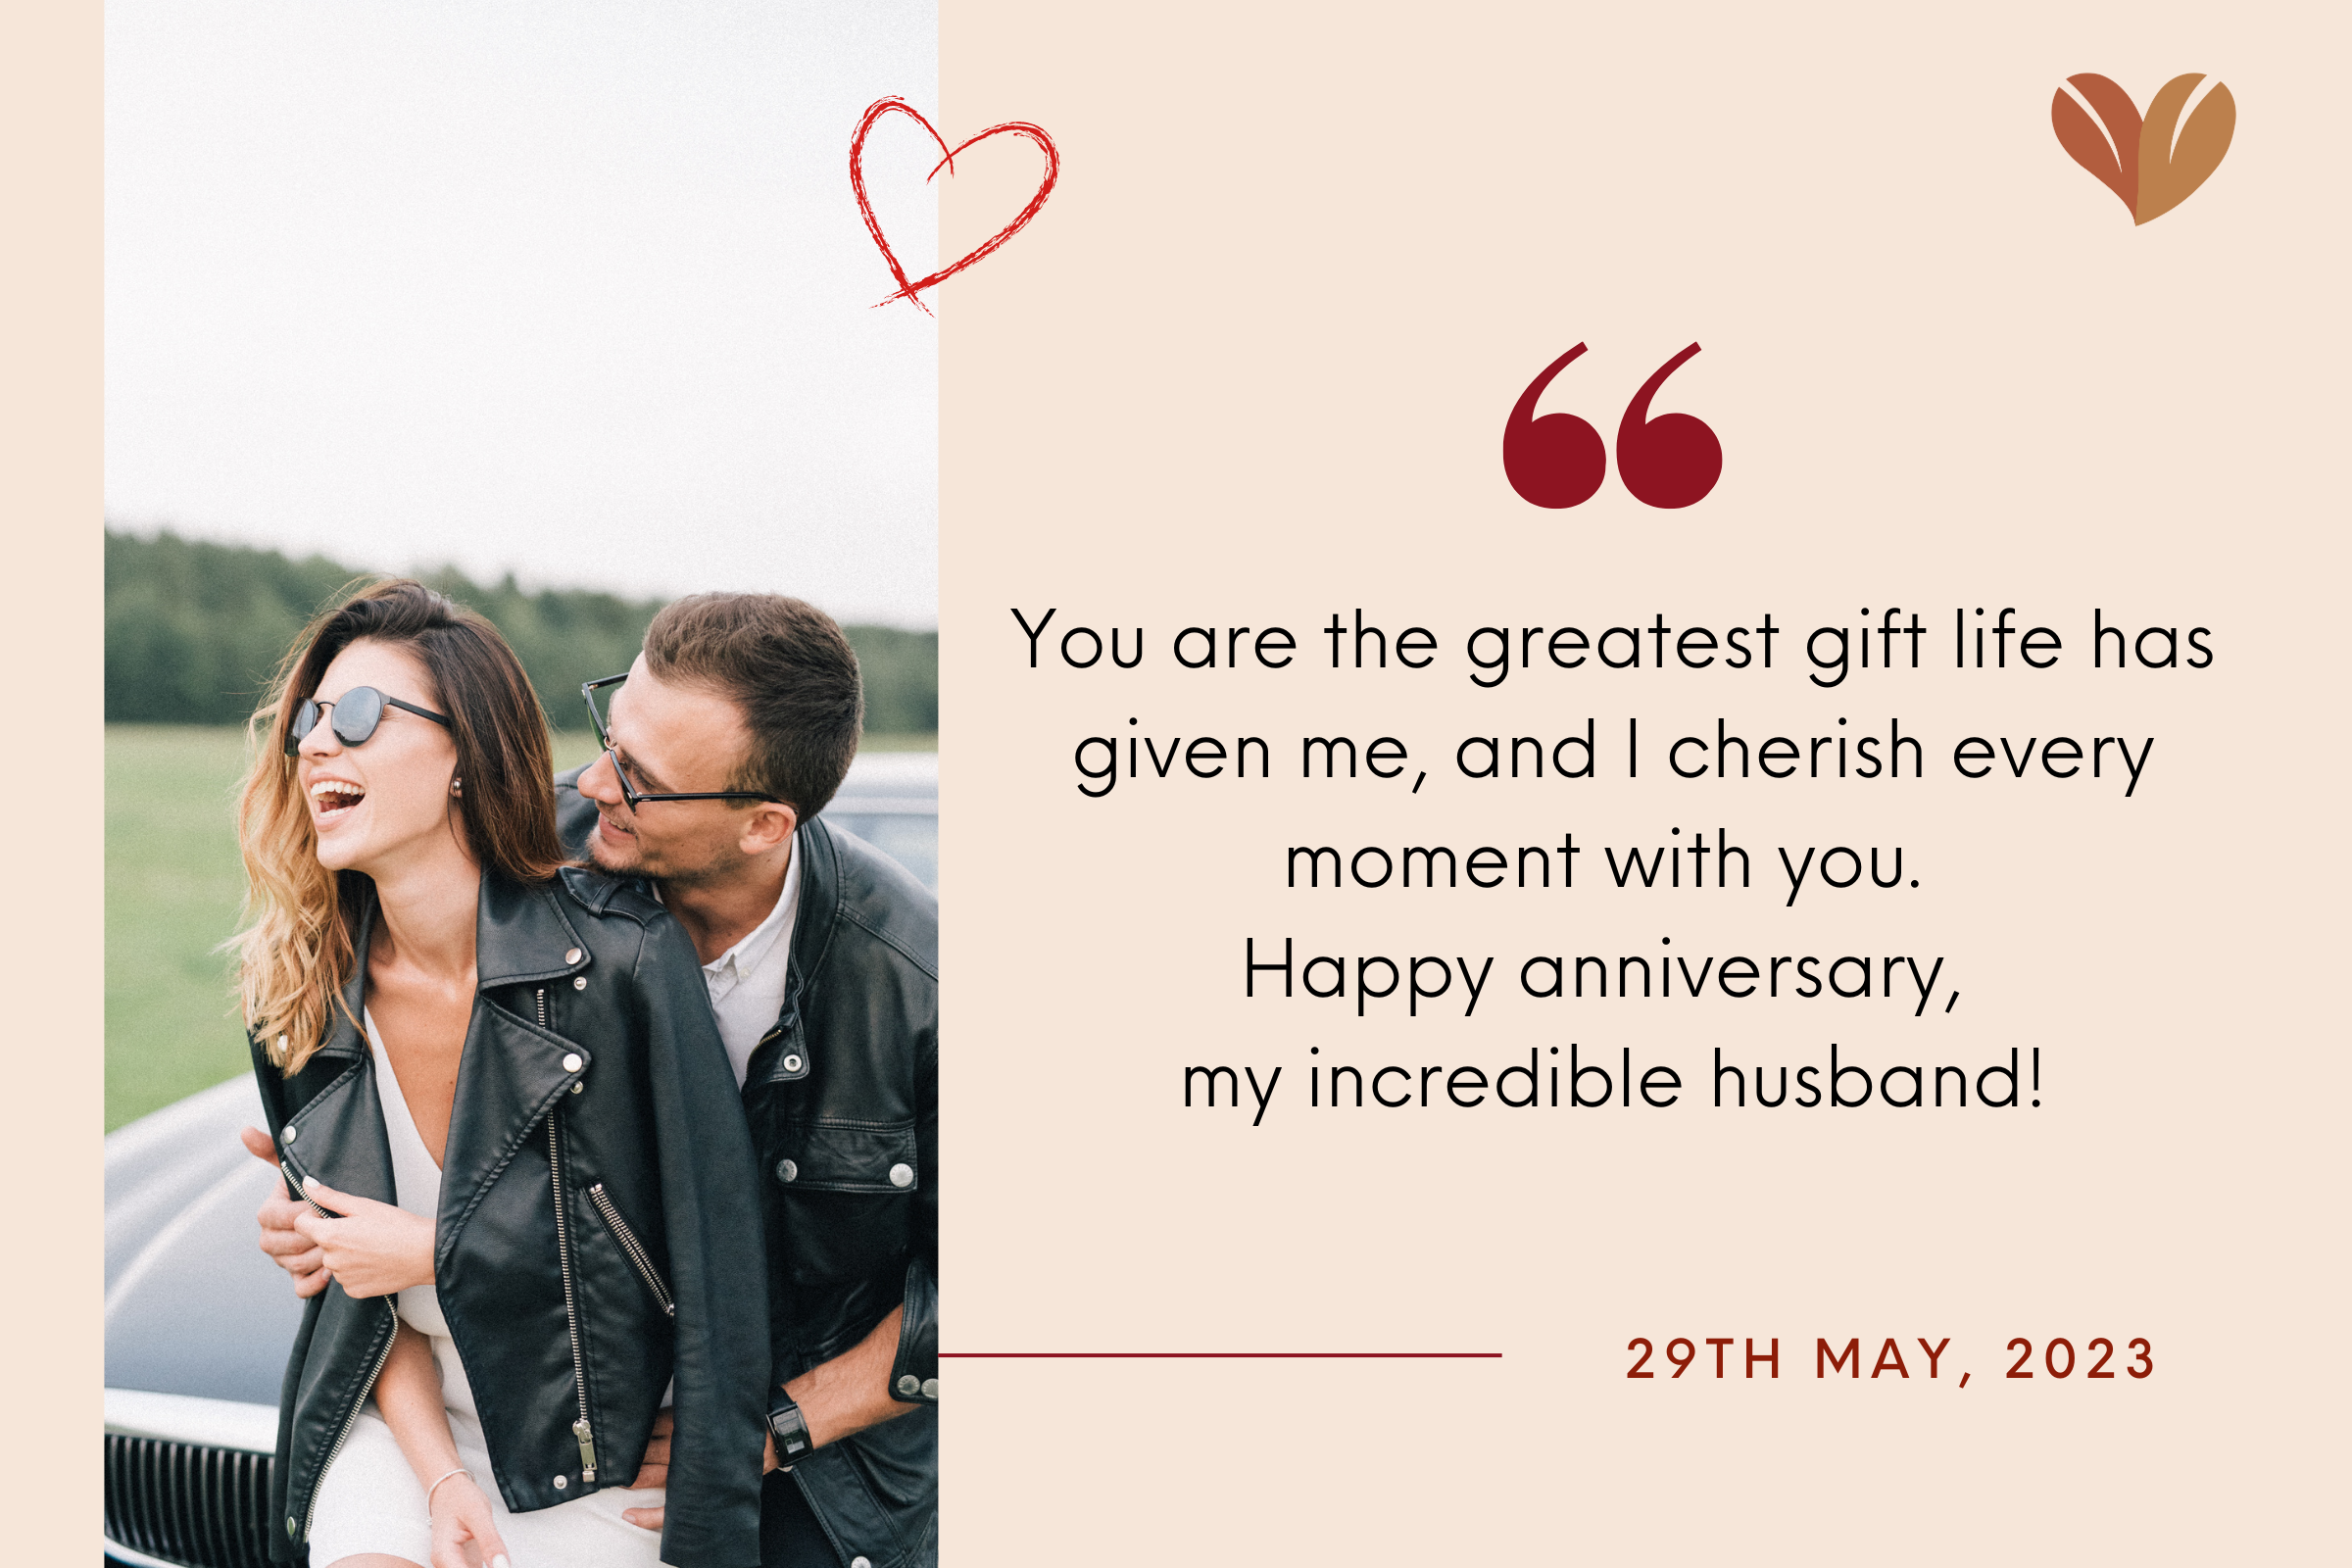 Anniversary quotes for husband will make him feel extremely appreciated